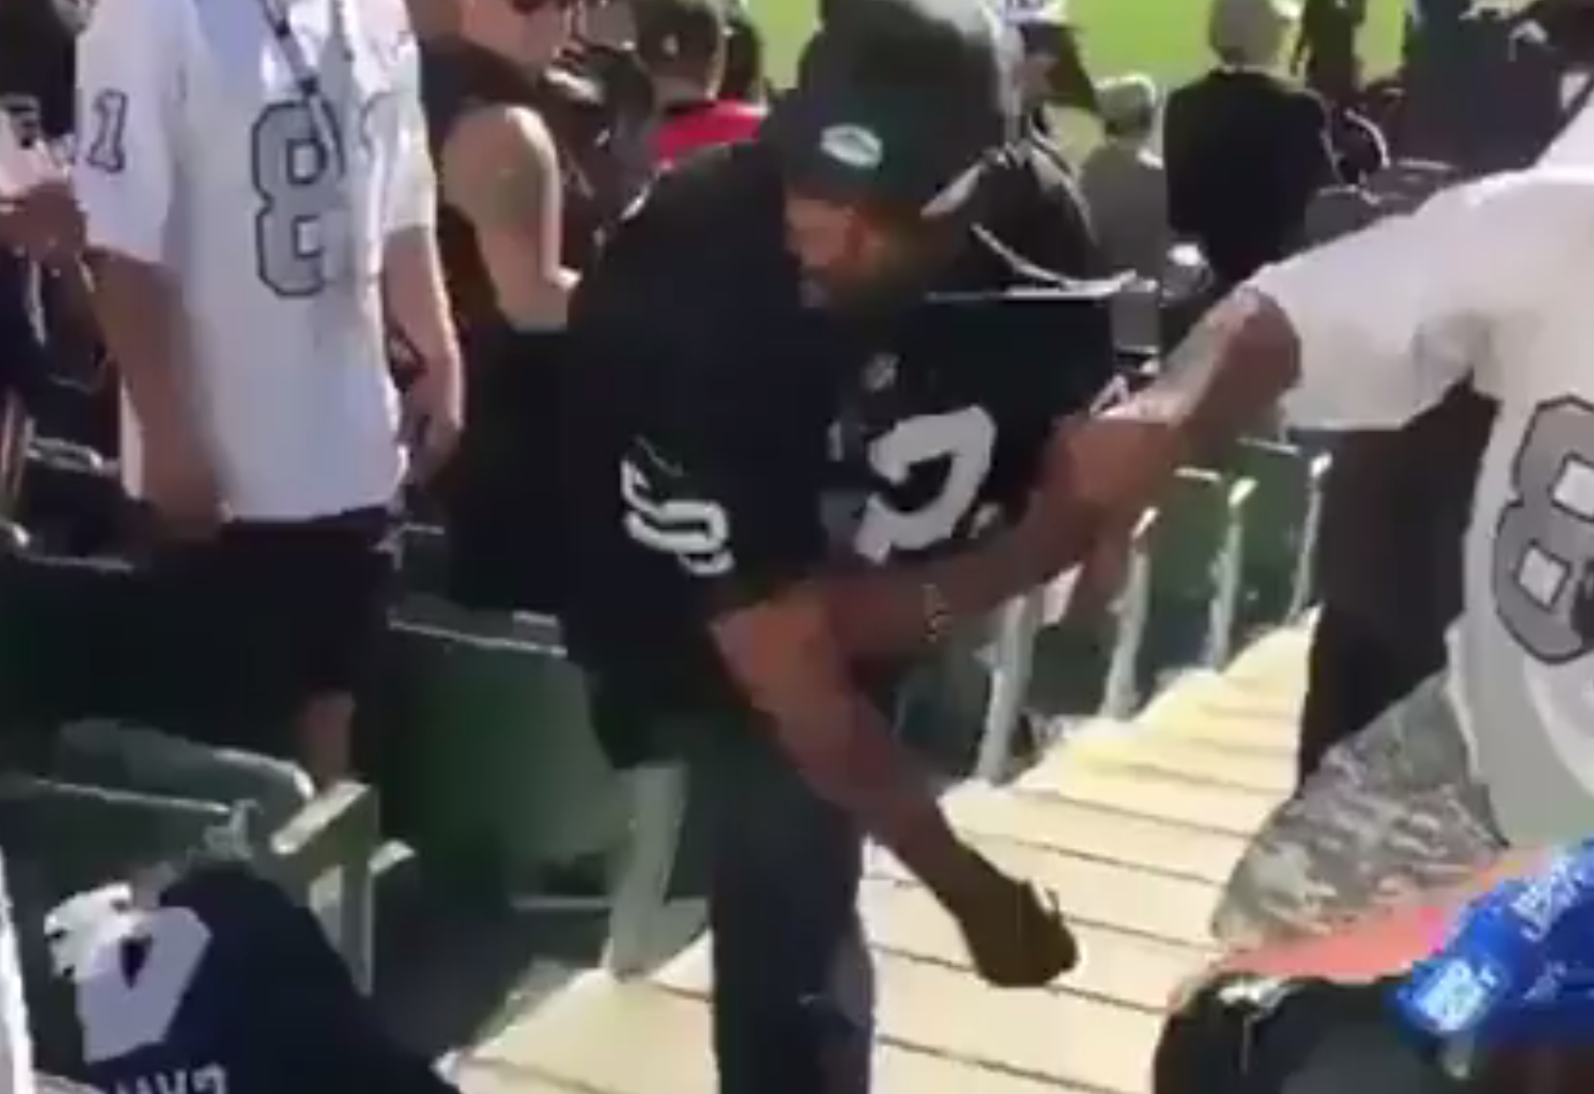 Raiders Fans Get In Brutal Fist Fight, Leaves One Fan Unconscious